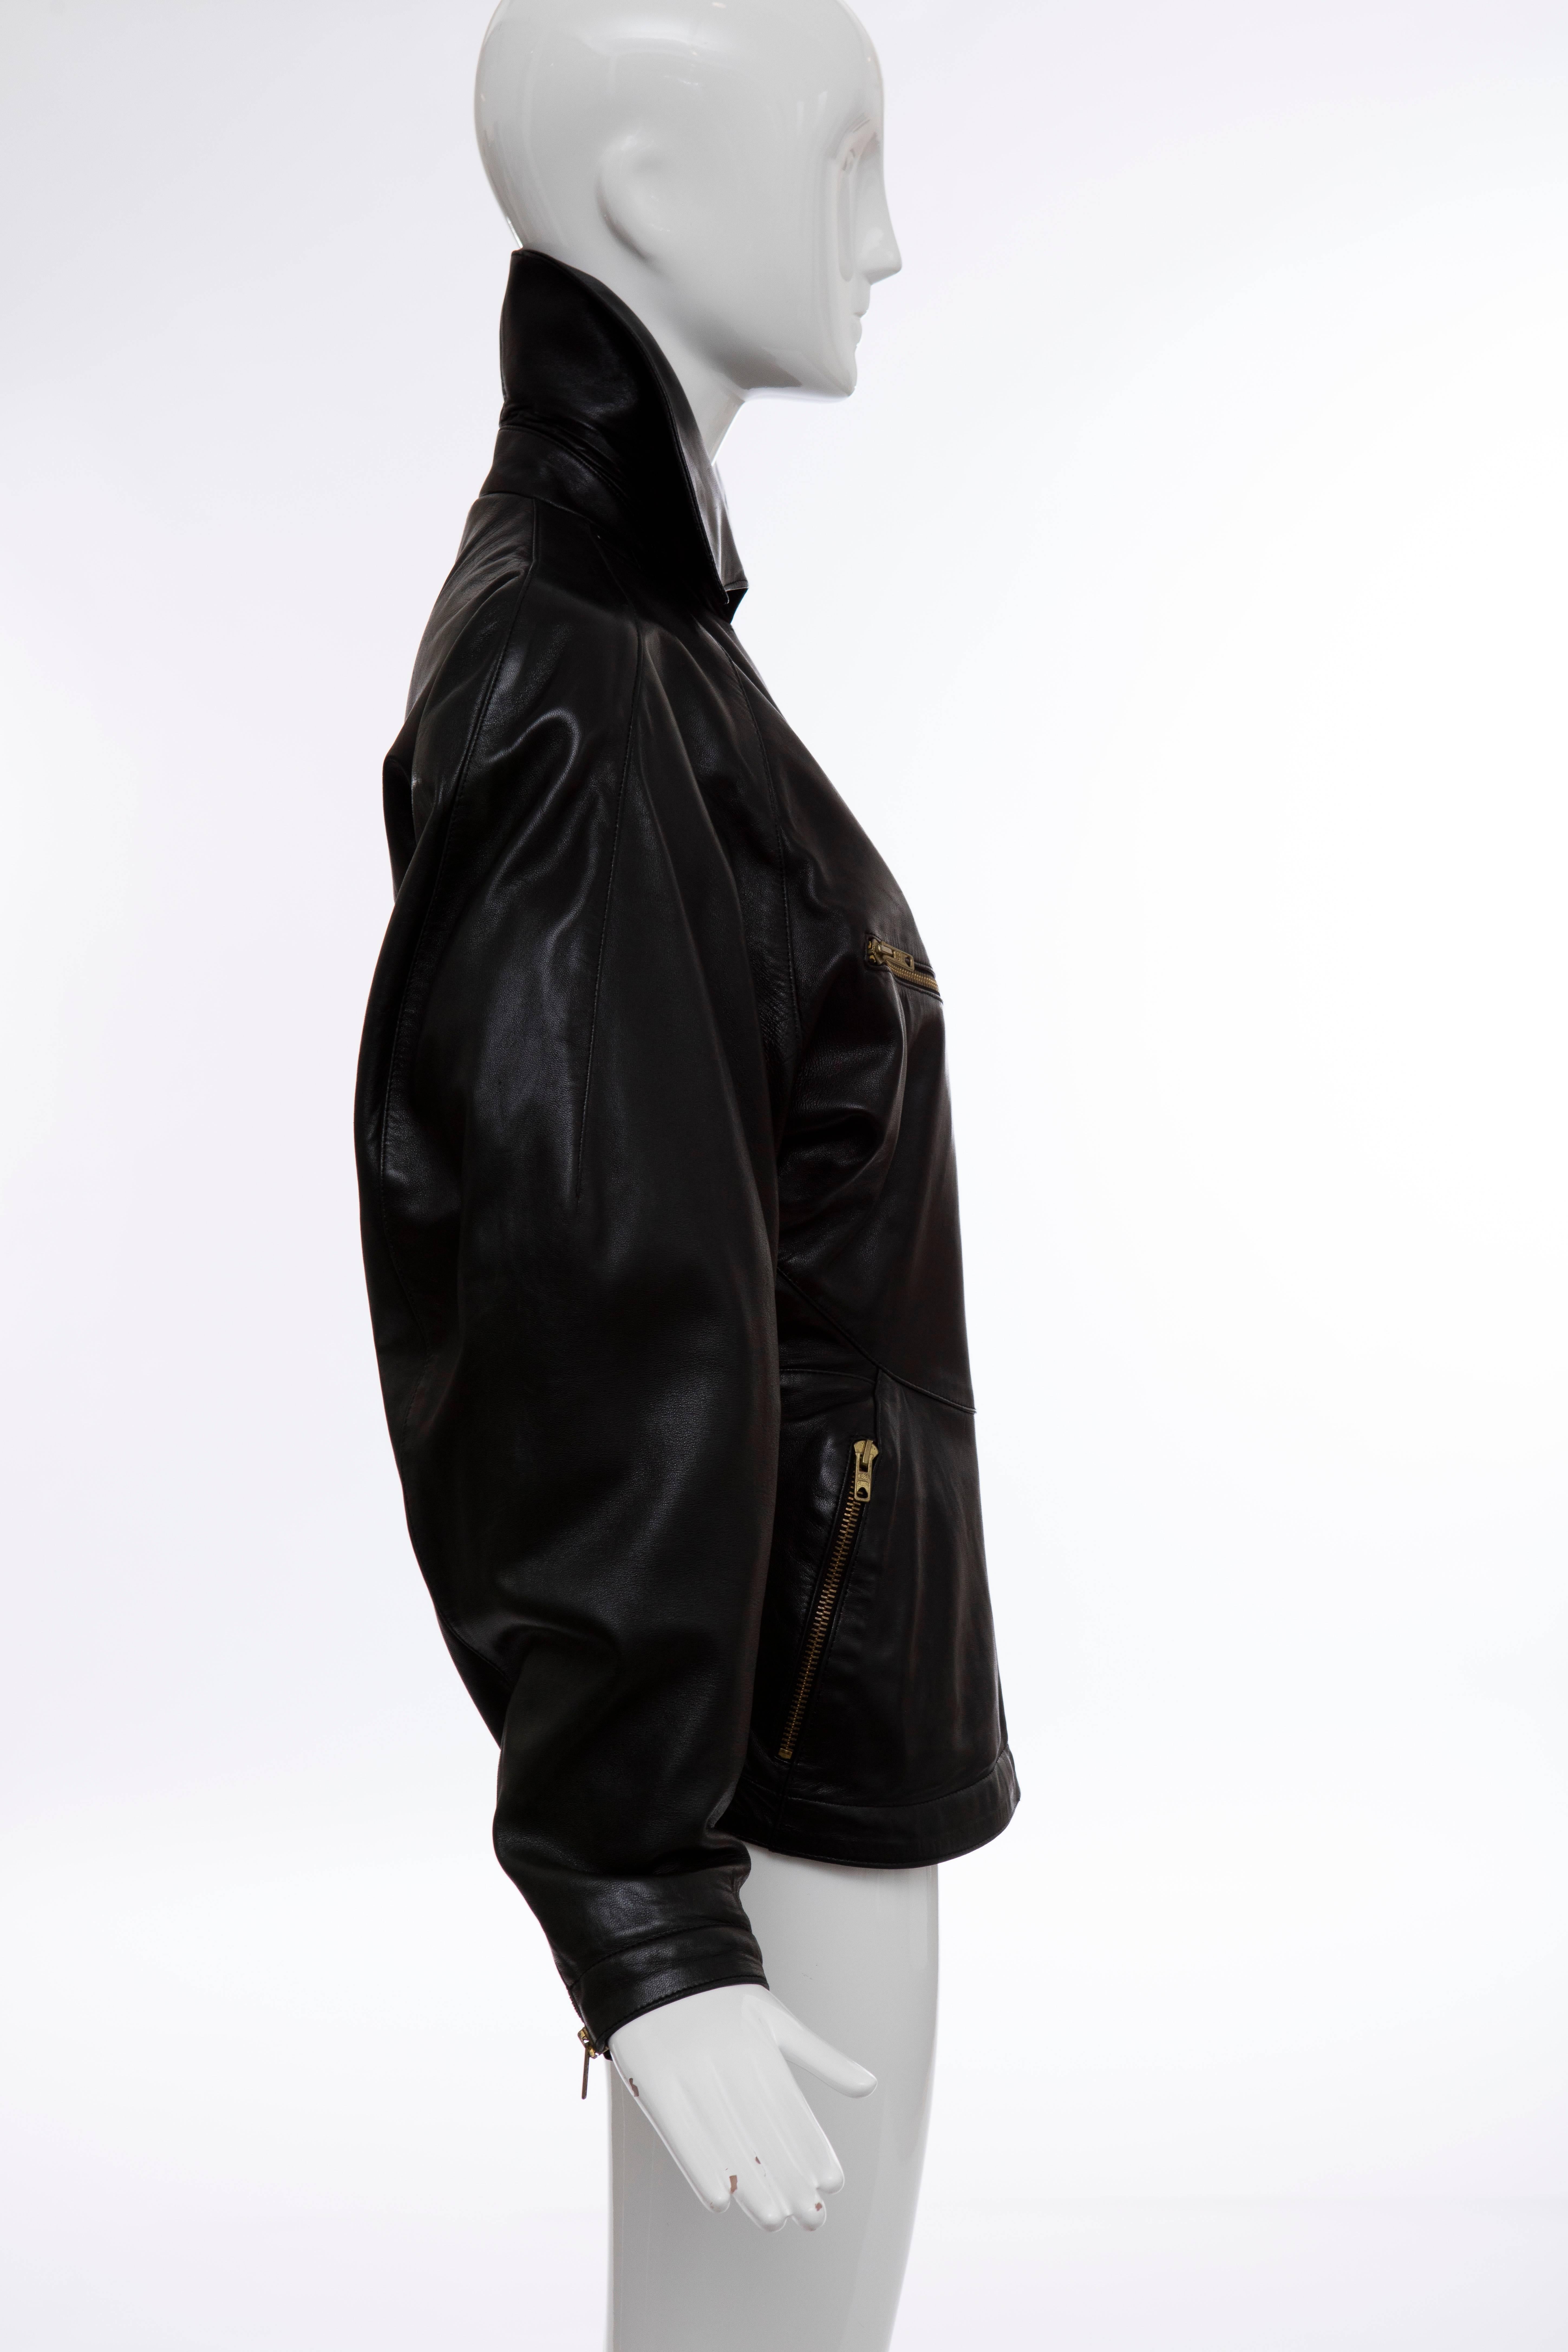 Azzedine Alai Black Zip Front Lambskin Leather Jacket , Circa 1986 In Excellent Condition For Sale In Cincinnati, OH